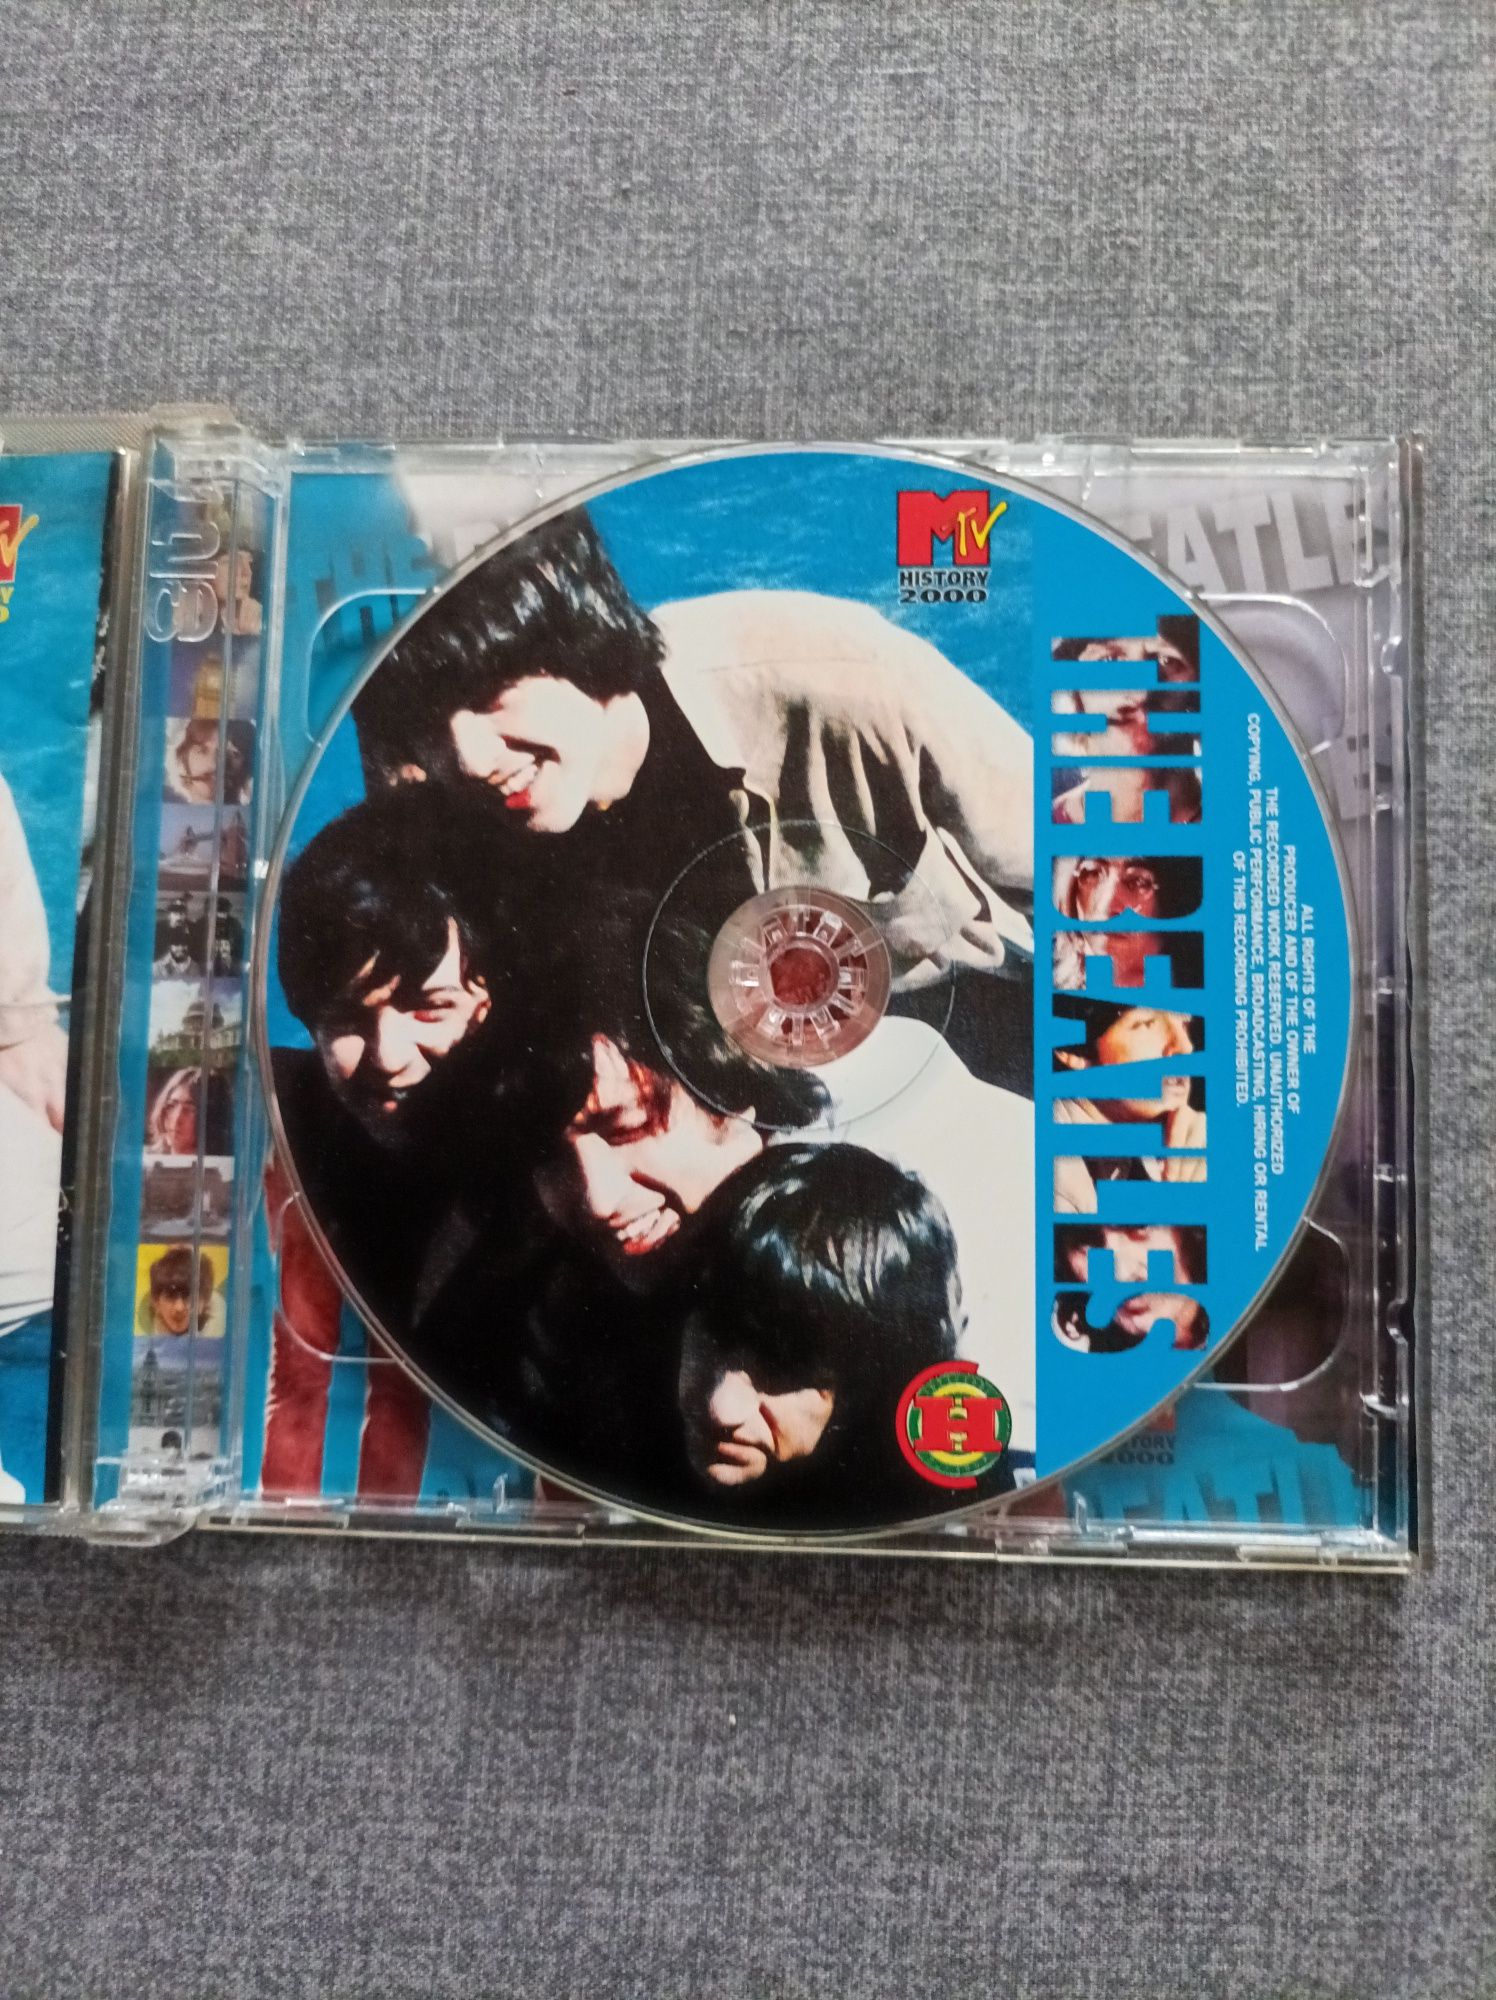 6 - The Beatles - THE BEST - 2 x CD  MTV HISTORY 2000